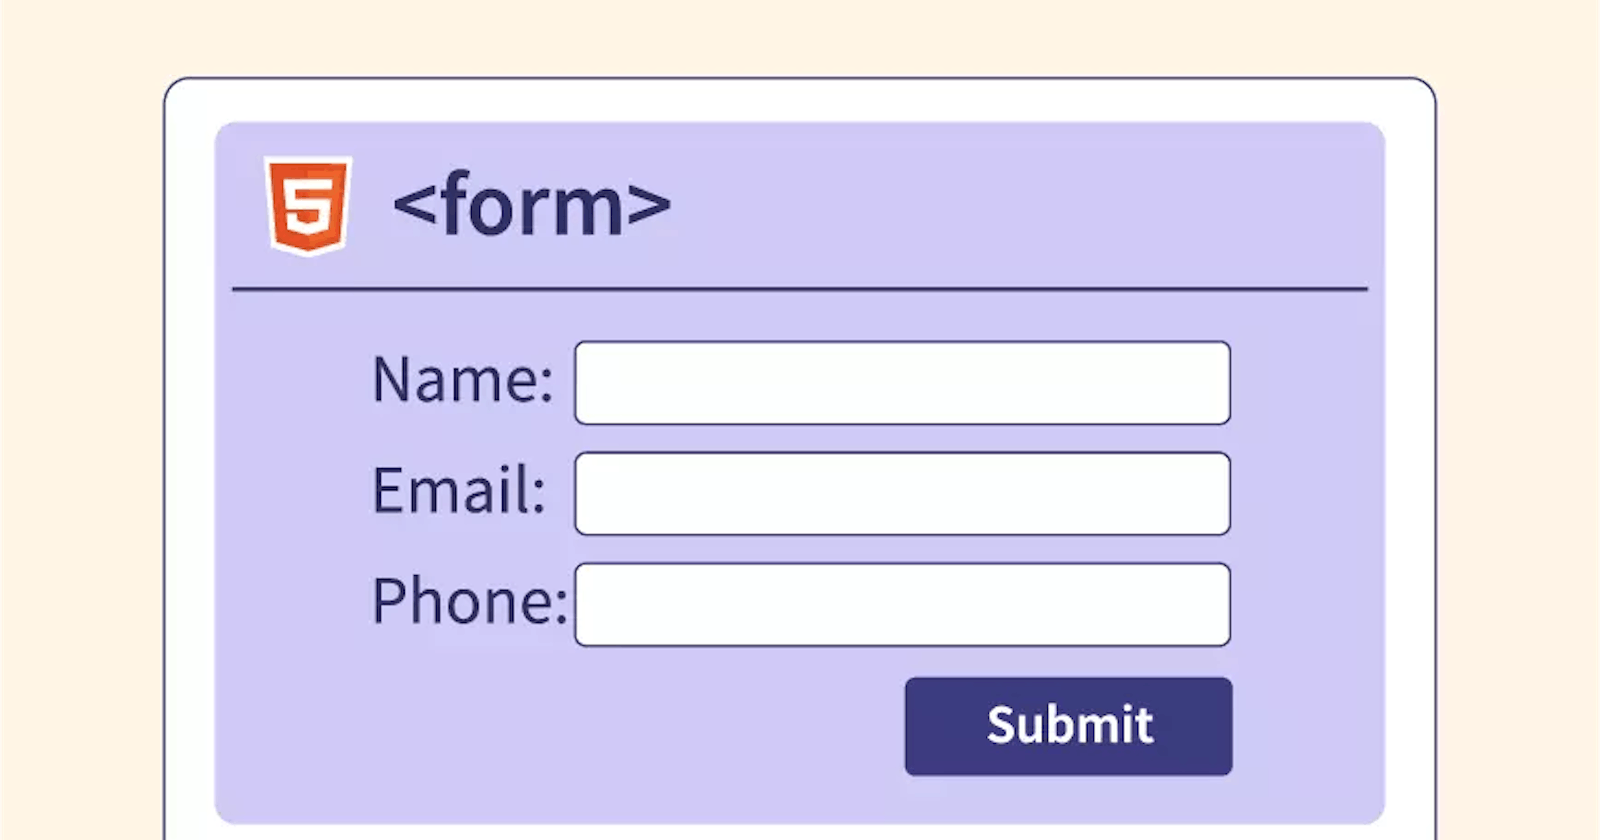 Working with HTML Forms